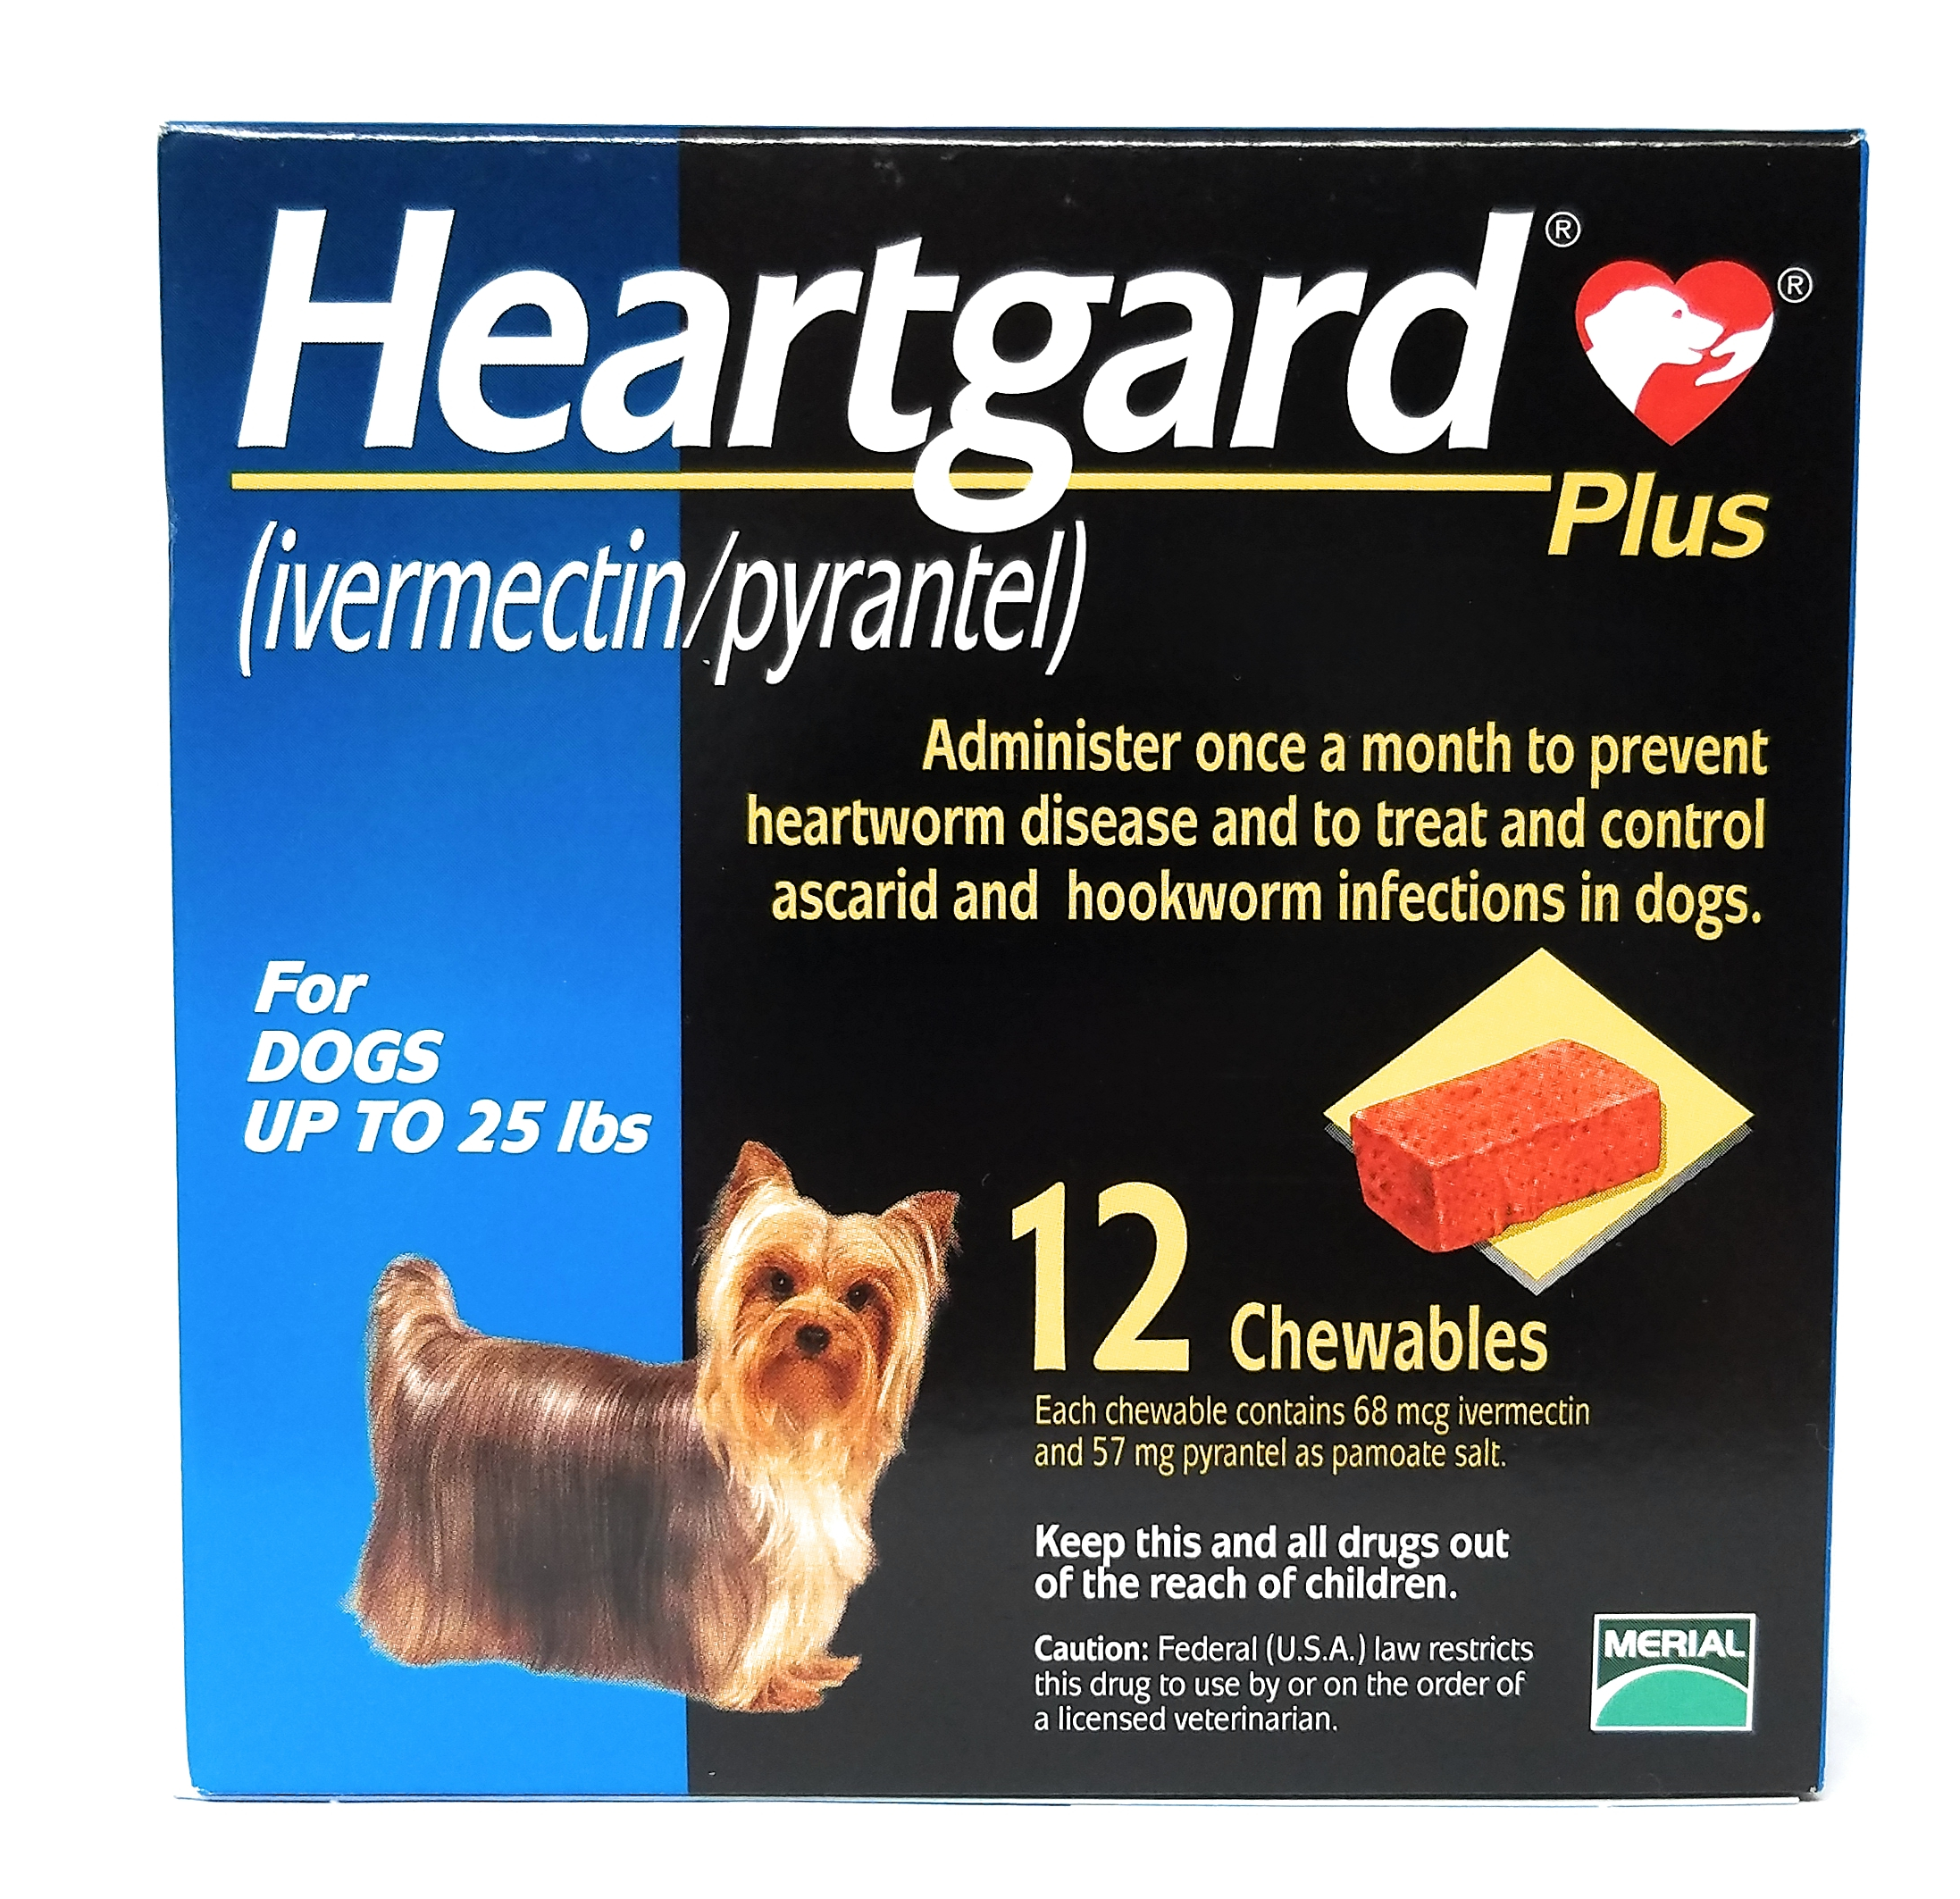 Vet Approved Rx Heartgard Plus for Dogs - Up to 25 lbs - 12 Doses